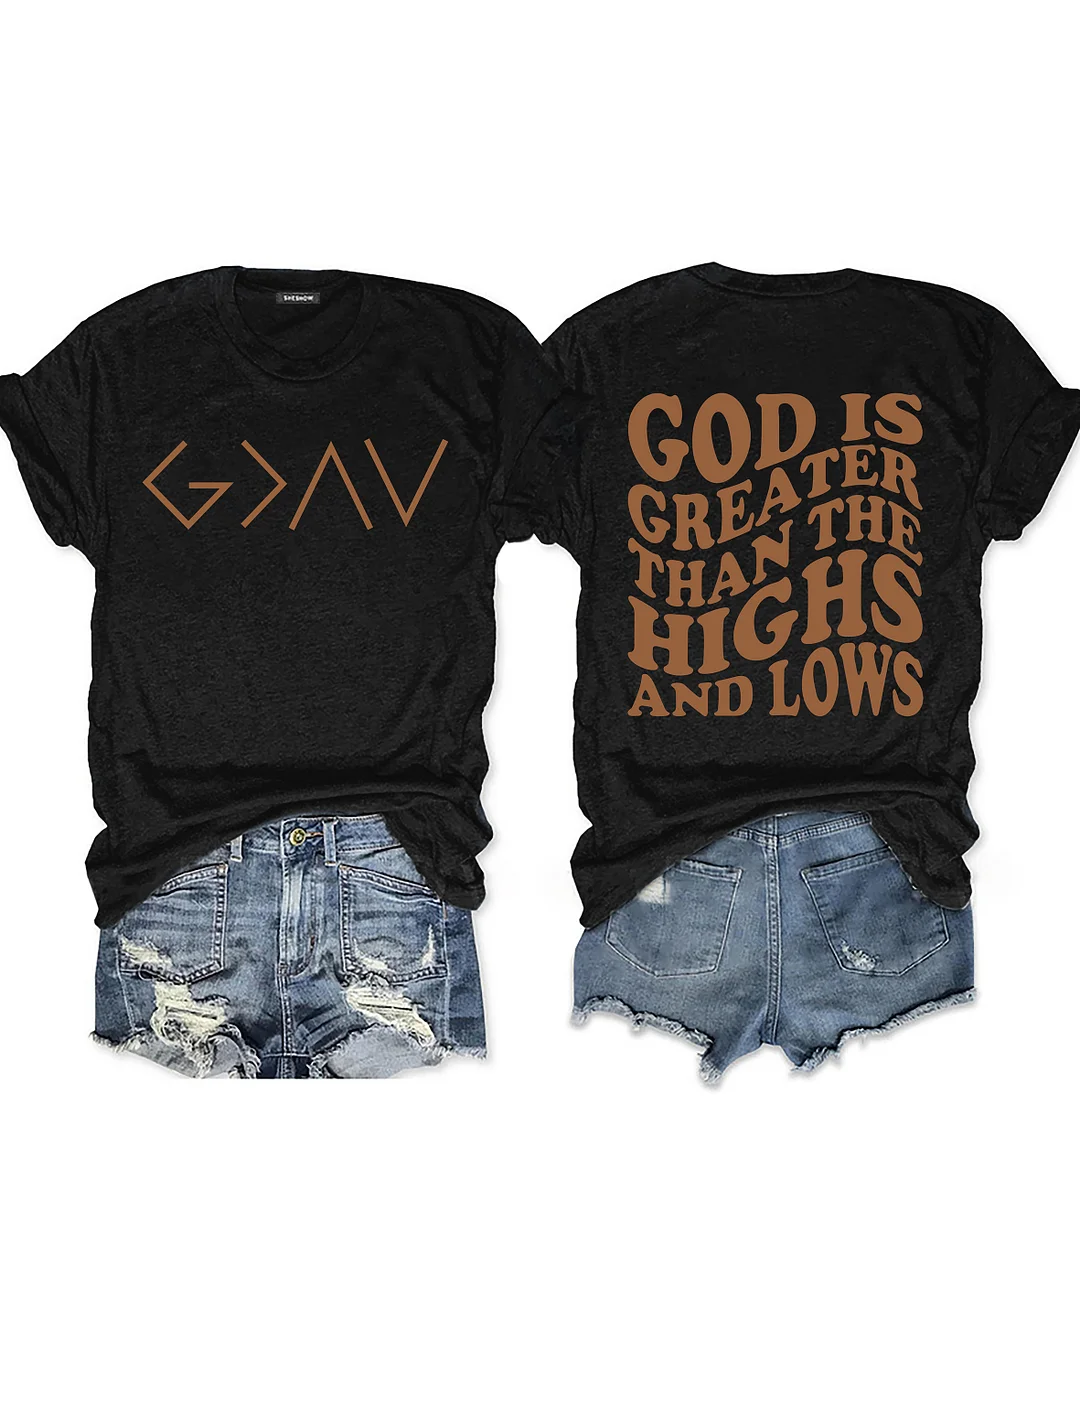 God is Greater Than the Highs and Lows T-shirt